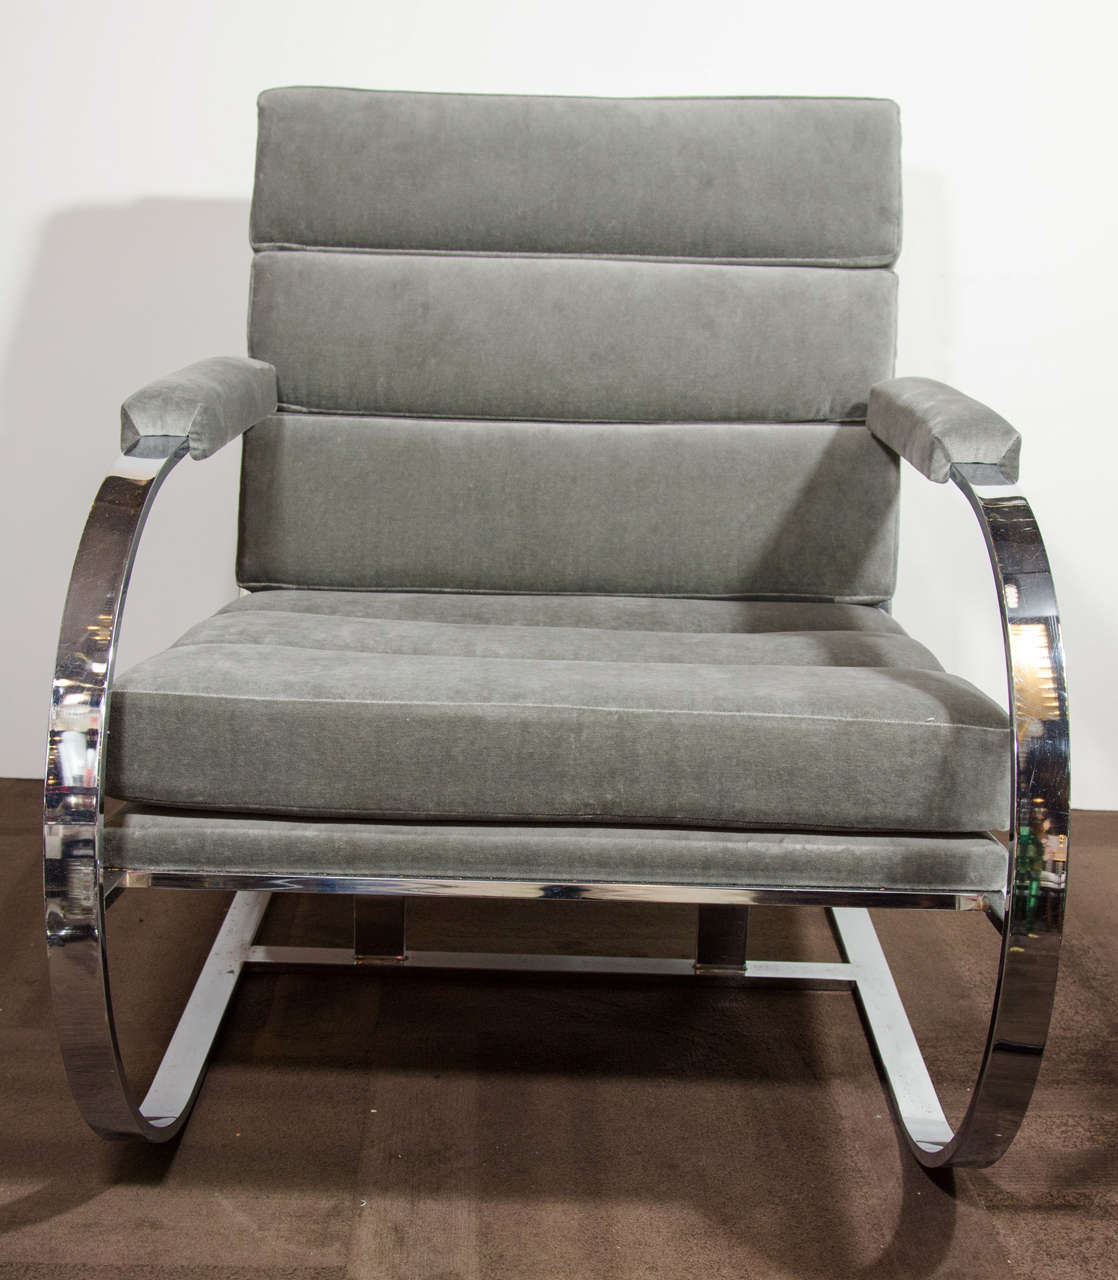 American Rare Modernist Lounge Chair with Horizontal Tufting Designed by Milo Baughman